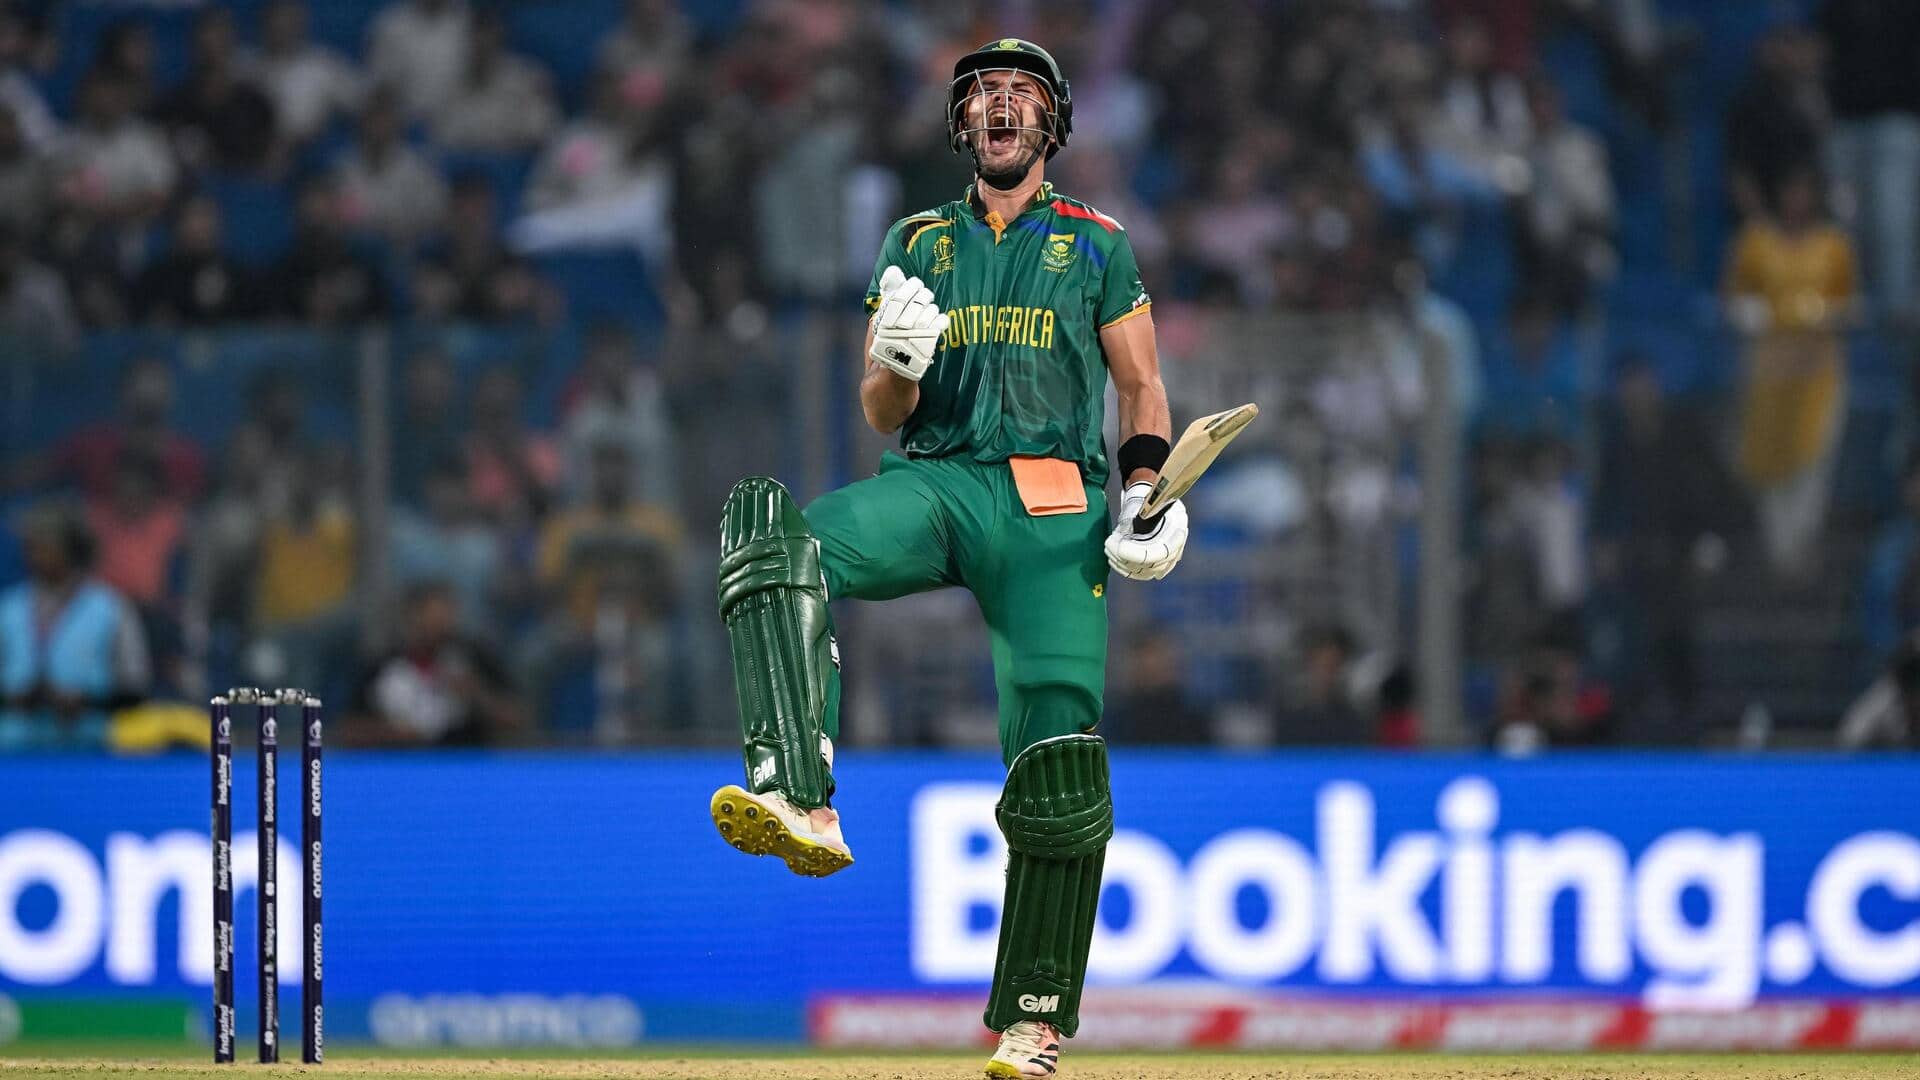 ICC World Cup, record-breaking South Africa hammer Sri Lanka: Stats